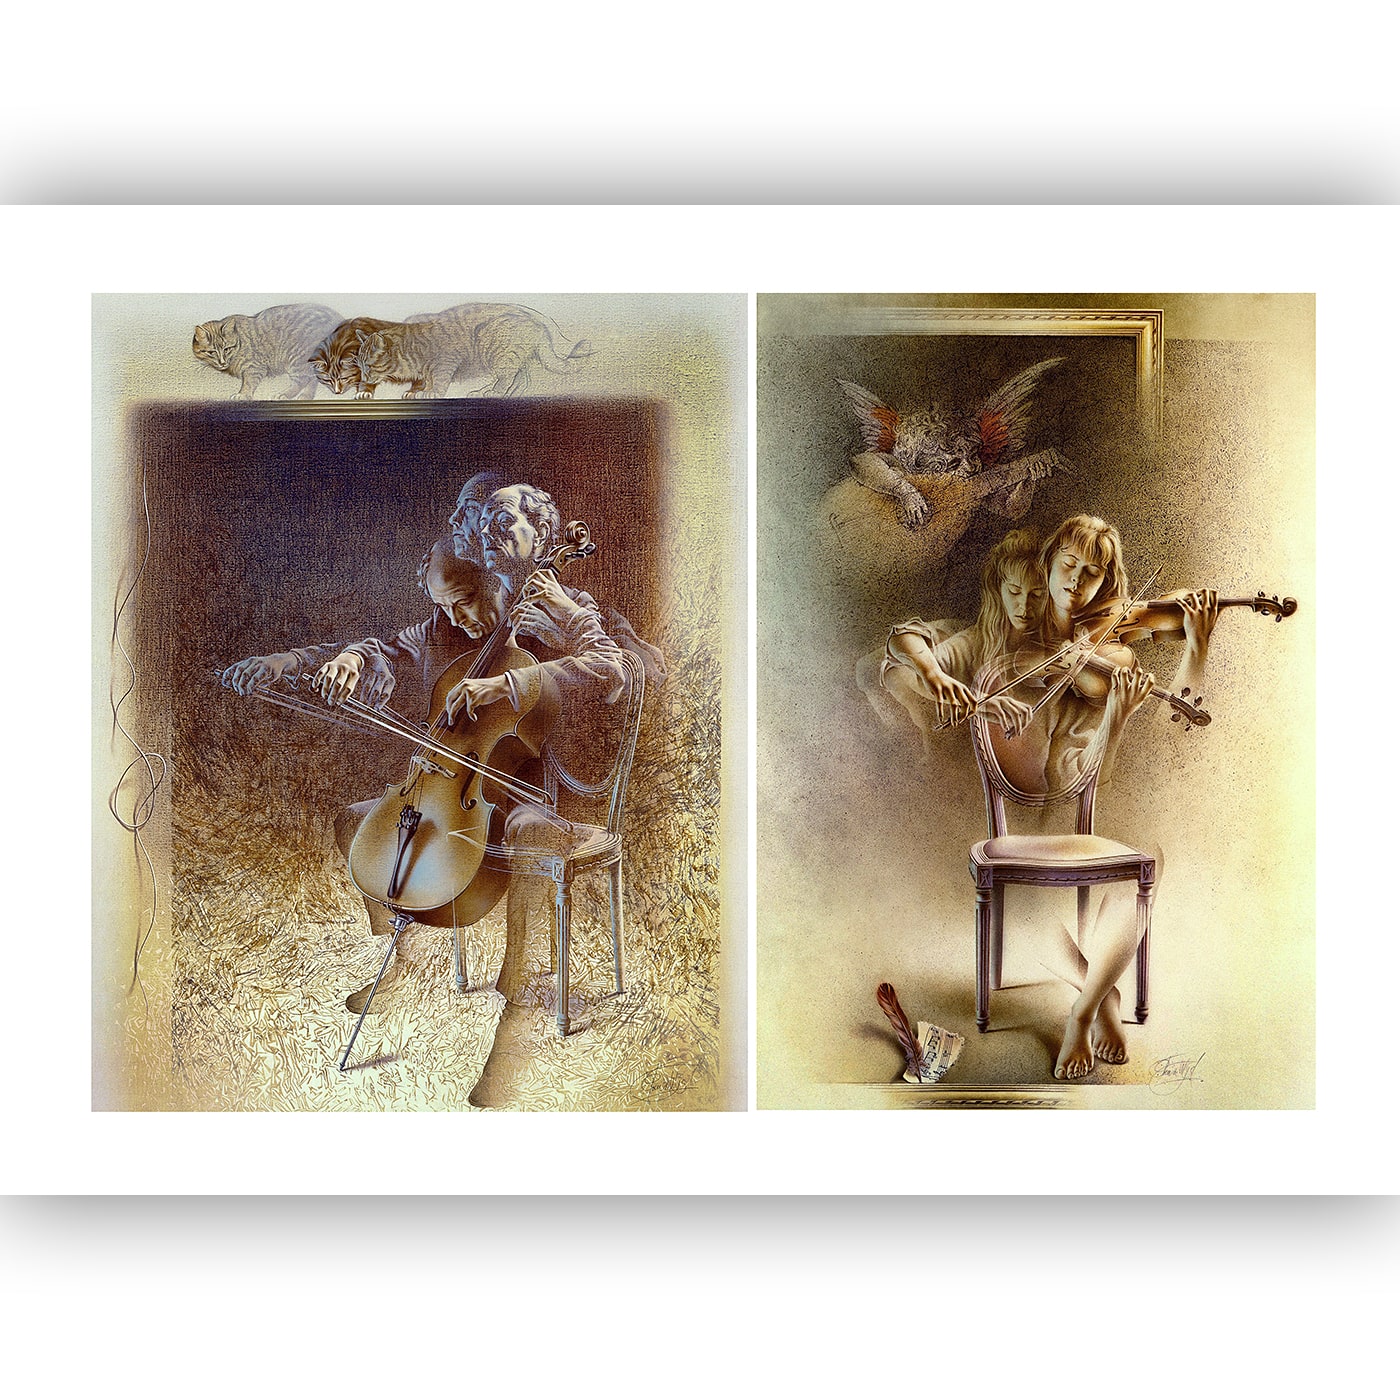 ‘Etude’, from brushes to strings. Oil painting, Collage Art print